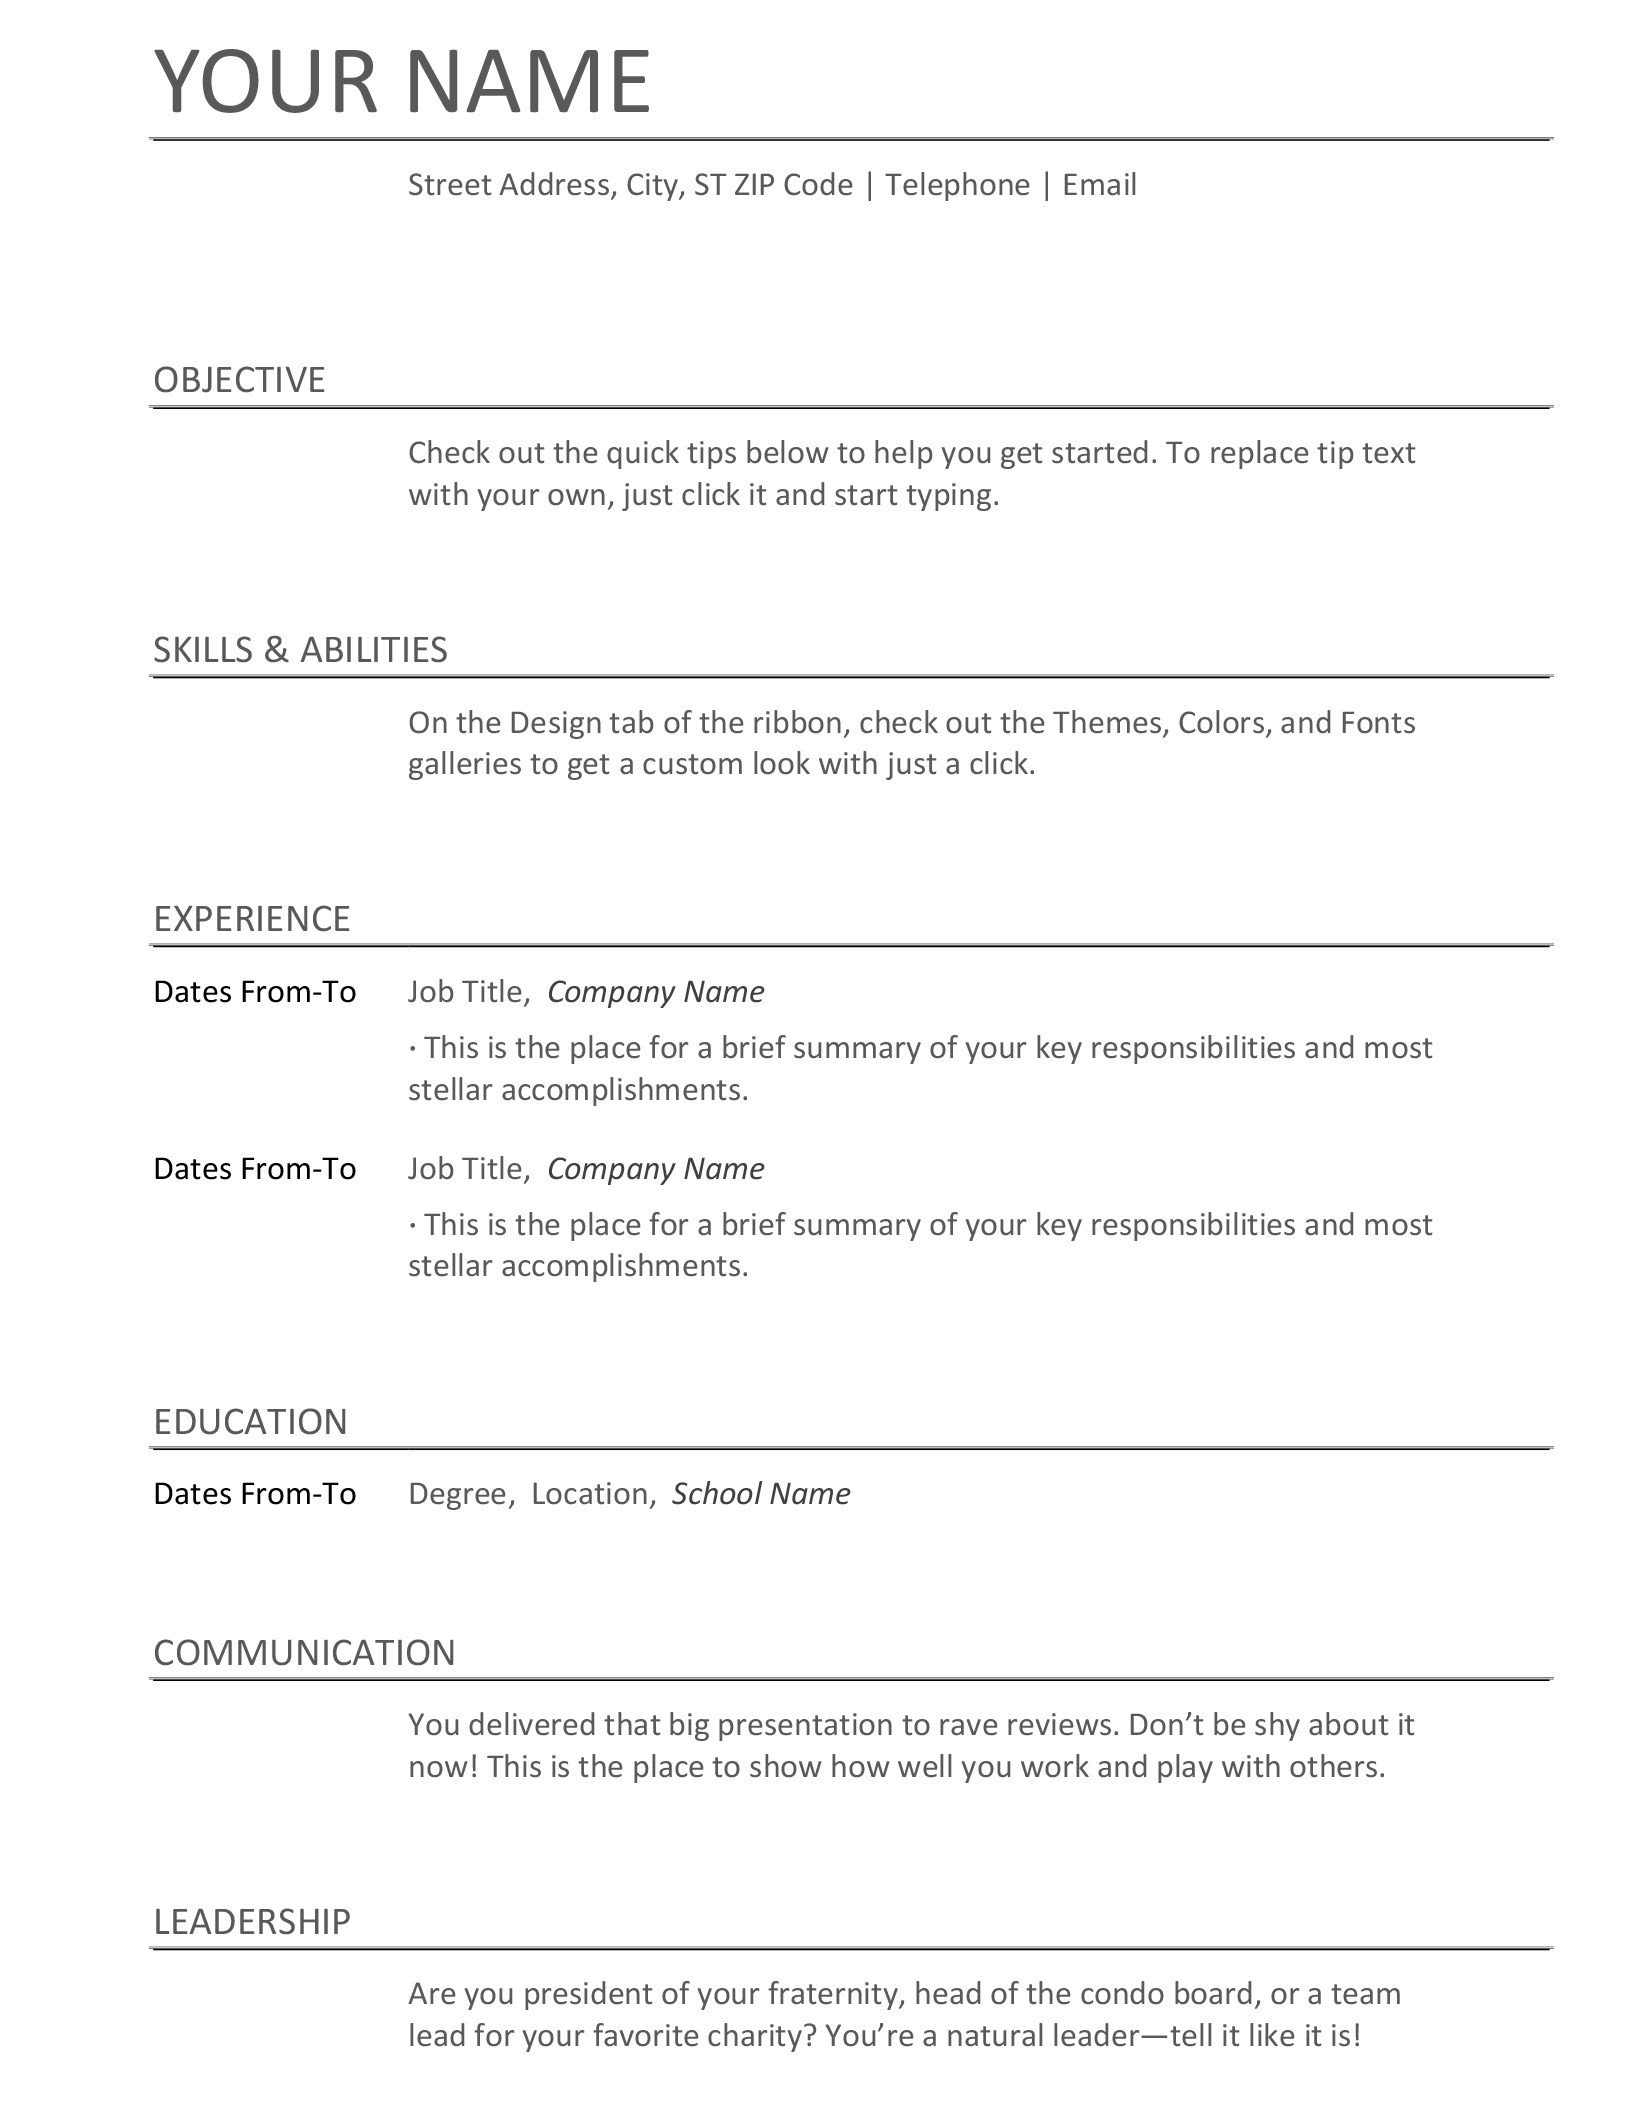 Microsoft Office Templates Resume Resumes and Cover Letters Fice